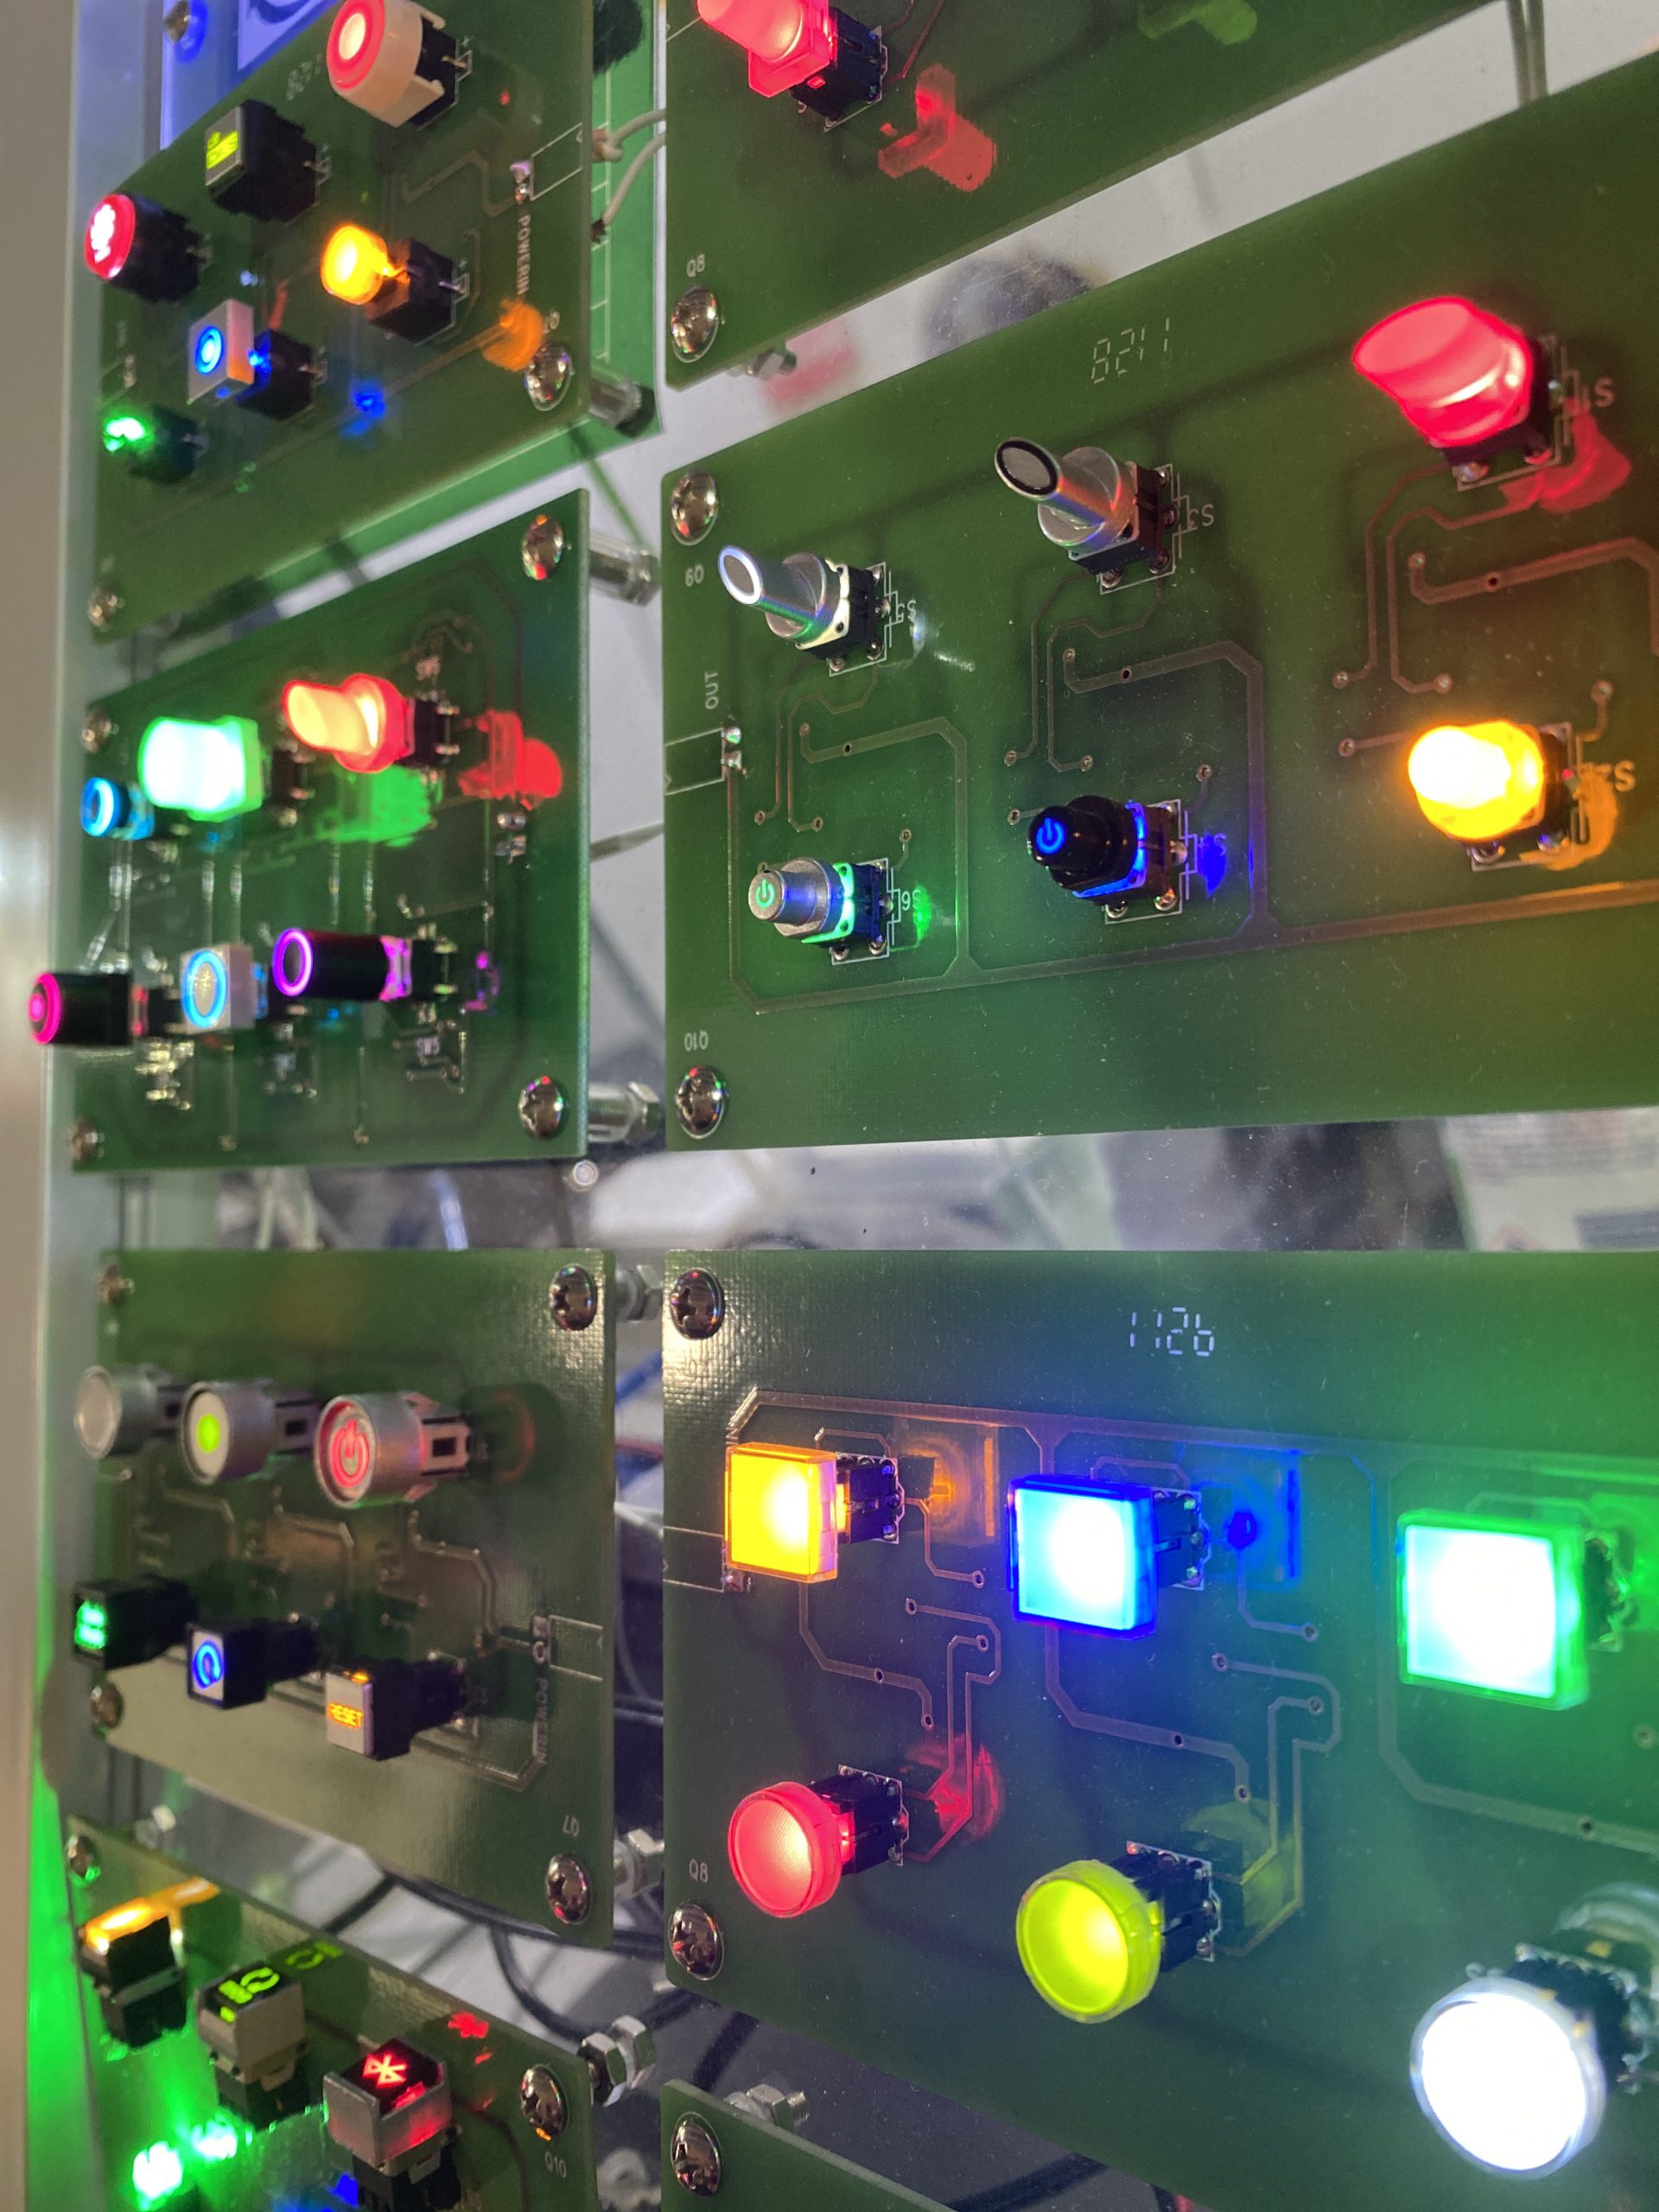 PCB and tact switches, led illuminated switches and components, rjs electronics ltd